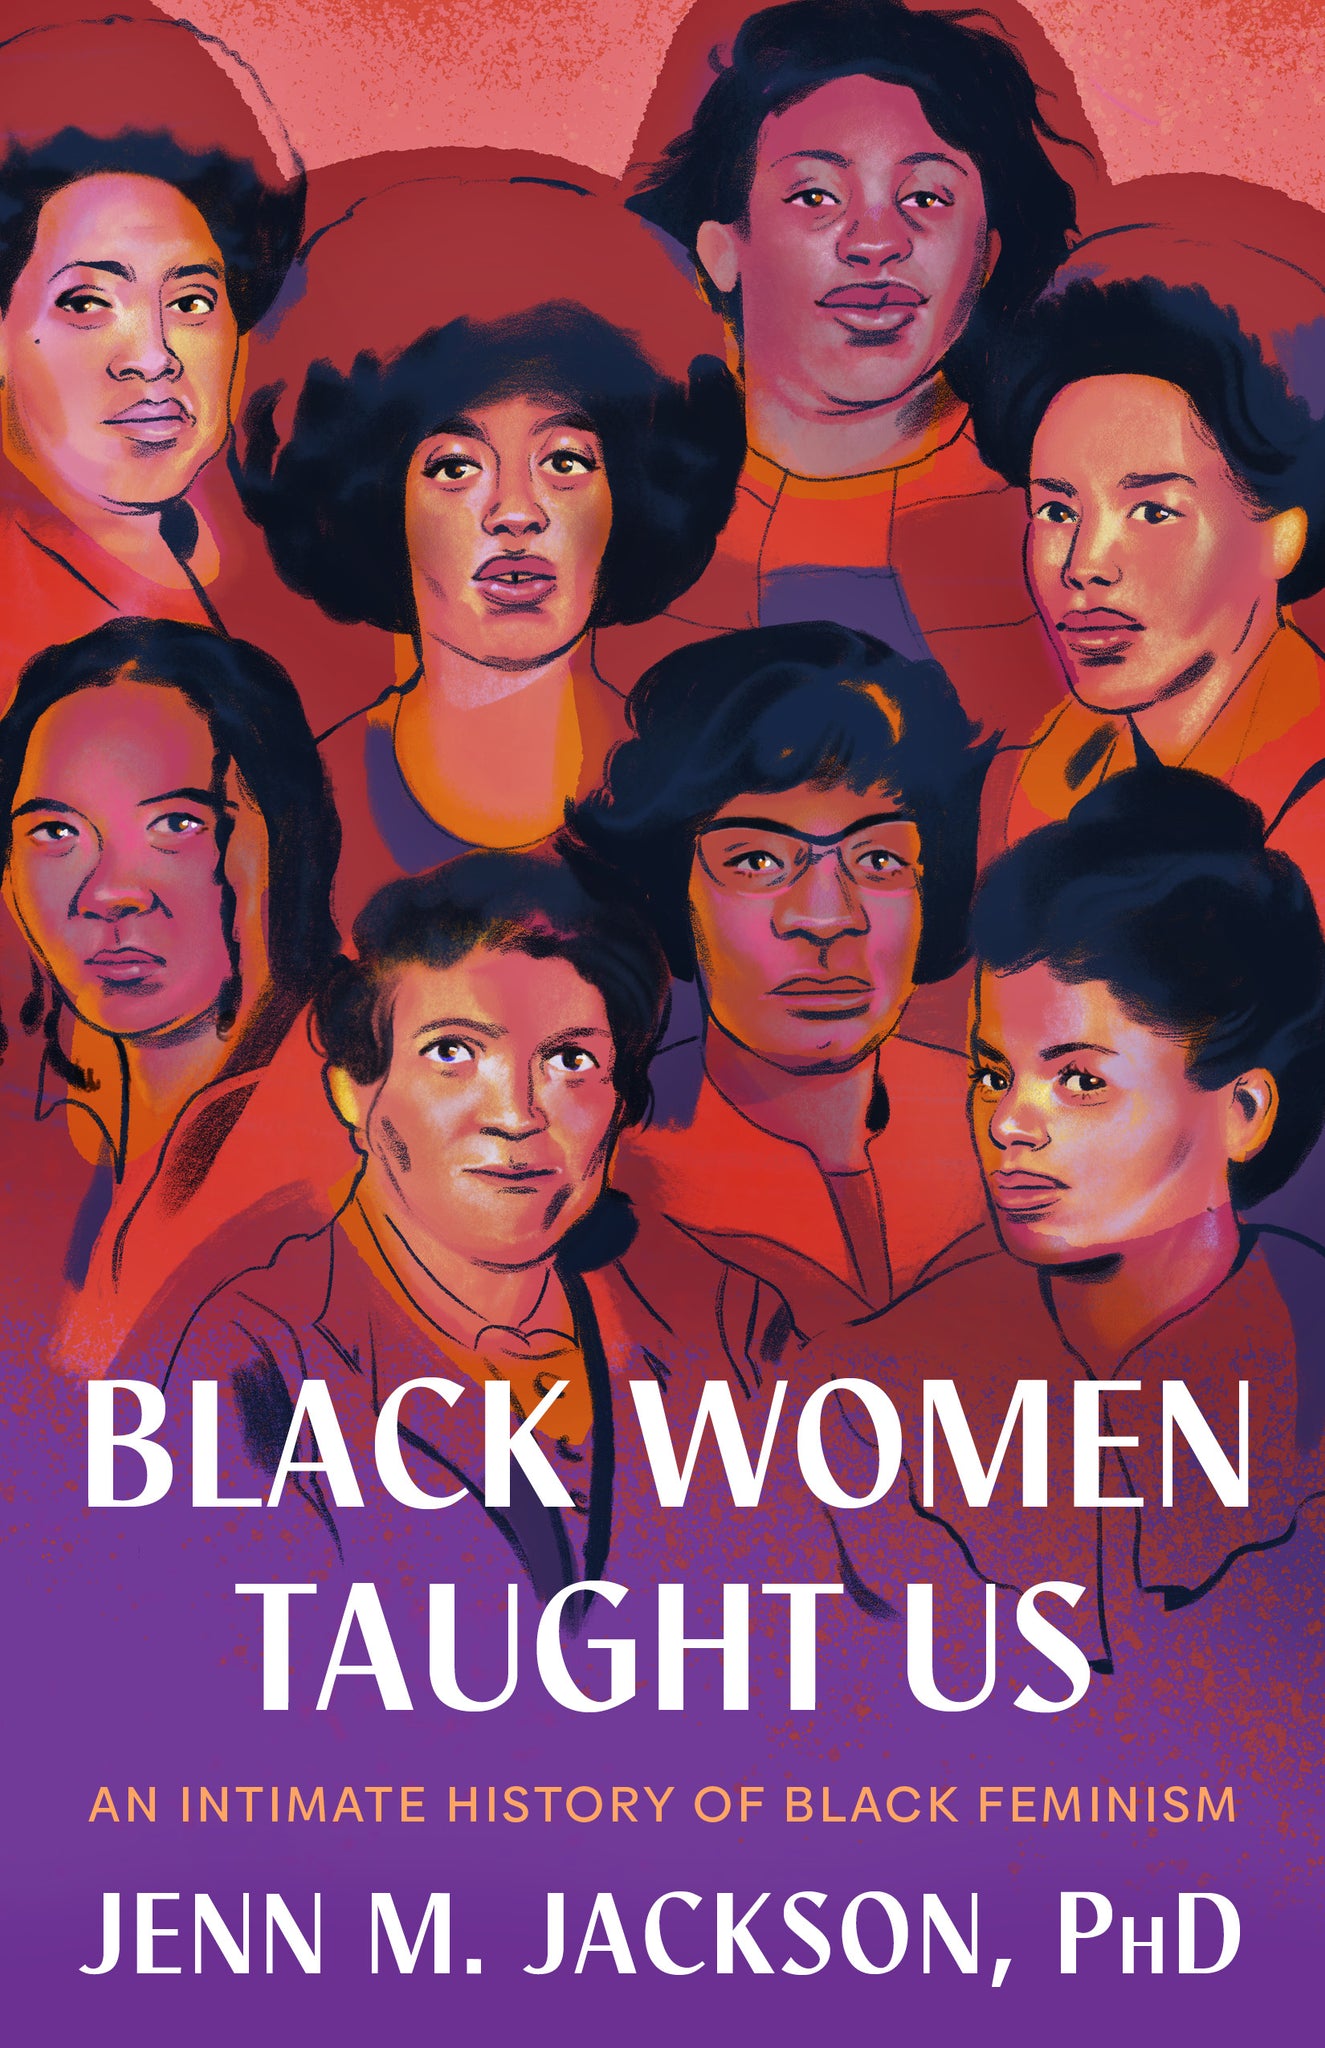 Black Women Taught Us: An Intimate History of Black Feminism (Hardcover)